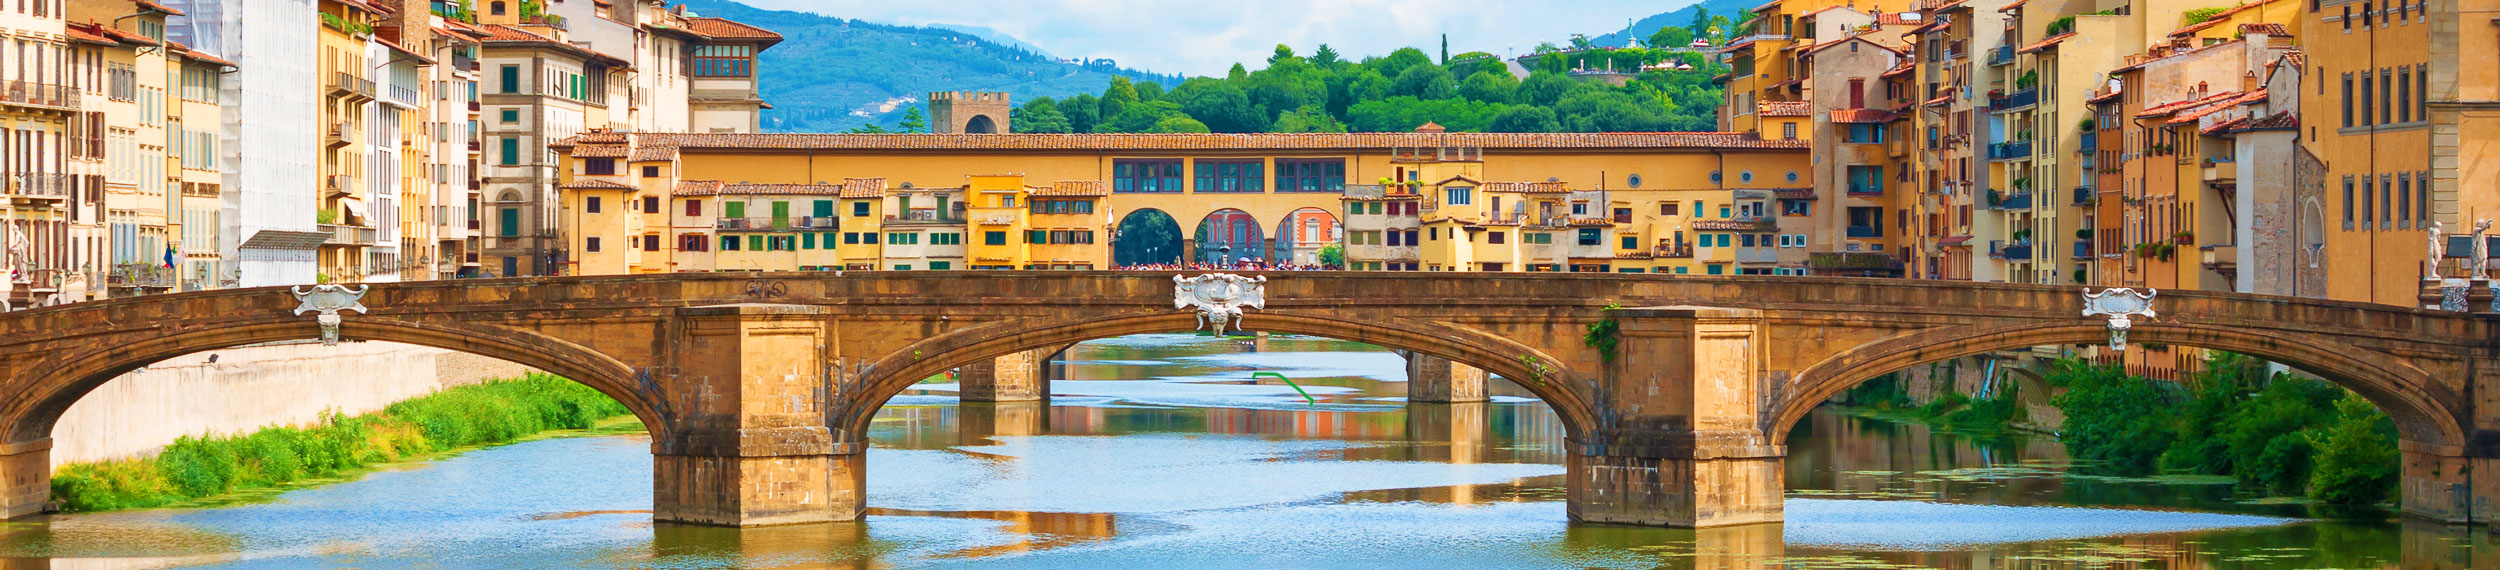 River Arno and Ponte Vecchio in Florence, Italy.